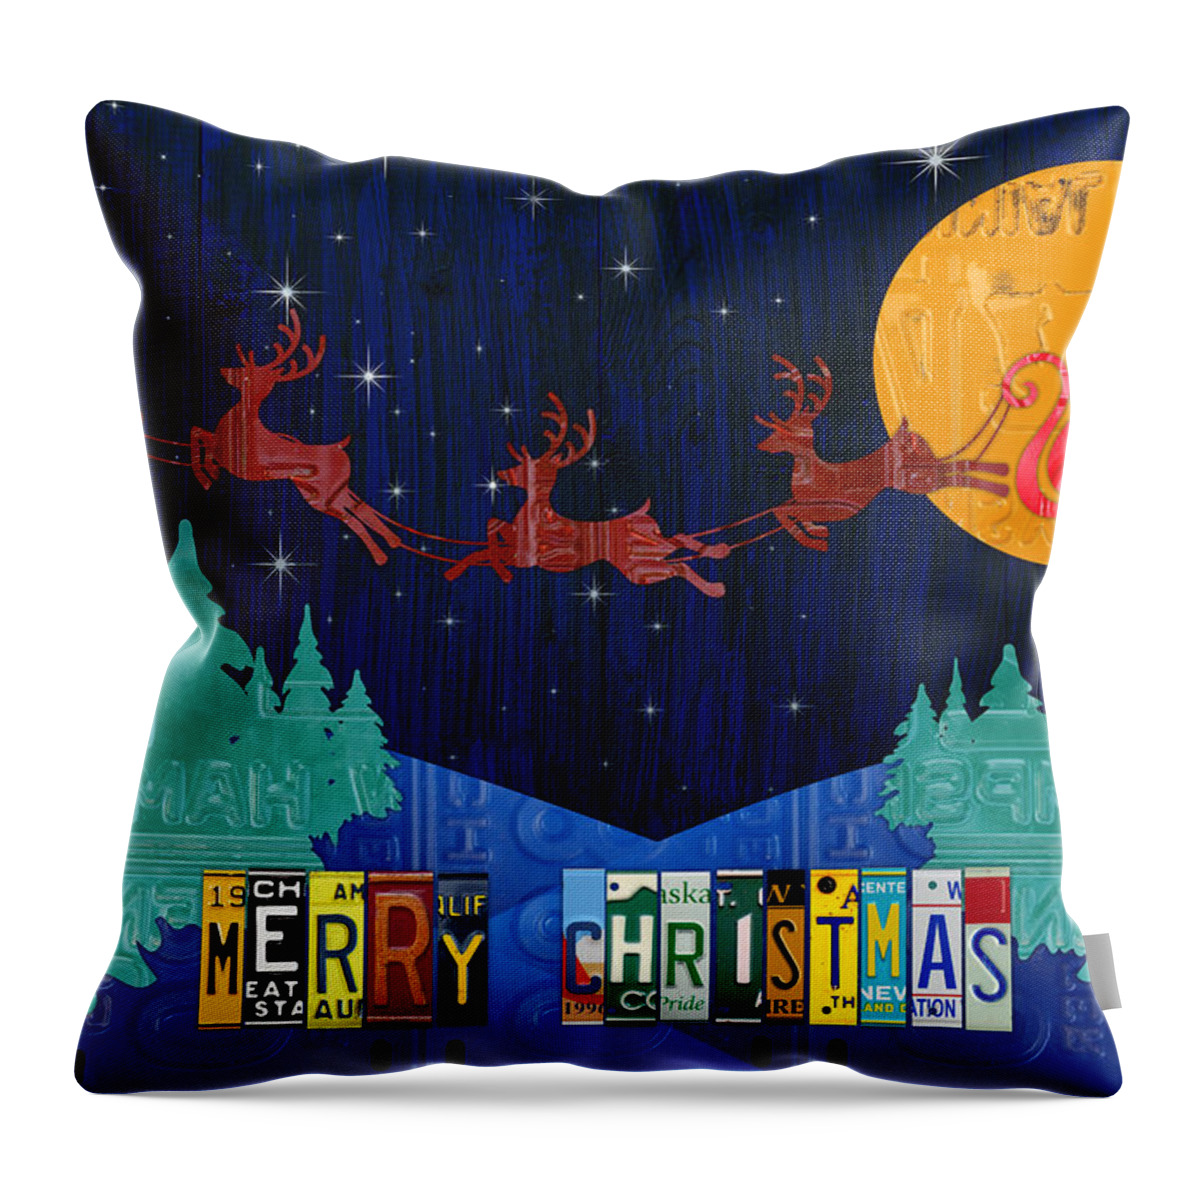 Merry Christmas Throw Pillow featuring the mixed media Merry Christmas Santa and His Sleigh Recycled Vintage License Plate Art by Design Turnpike